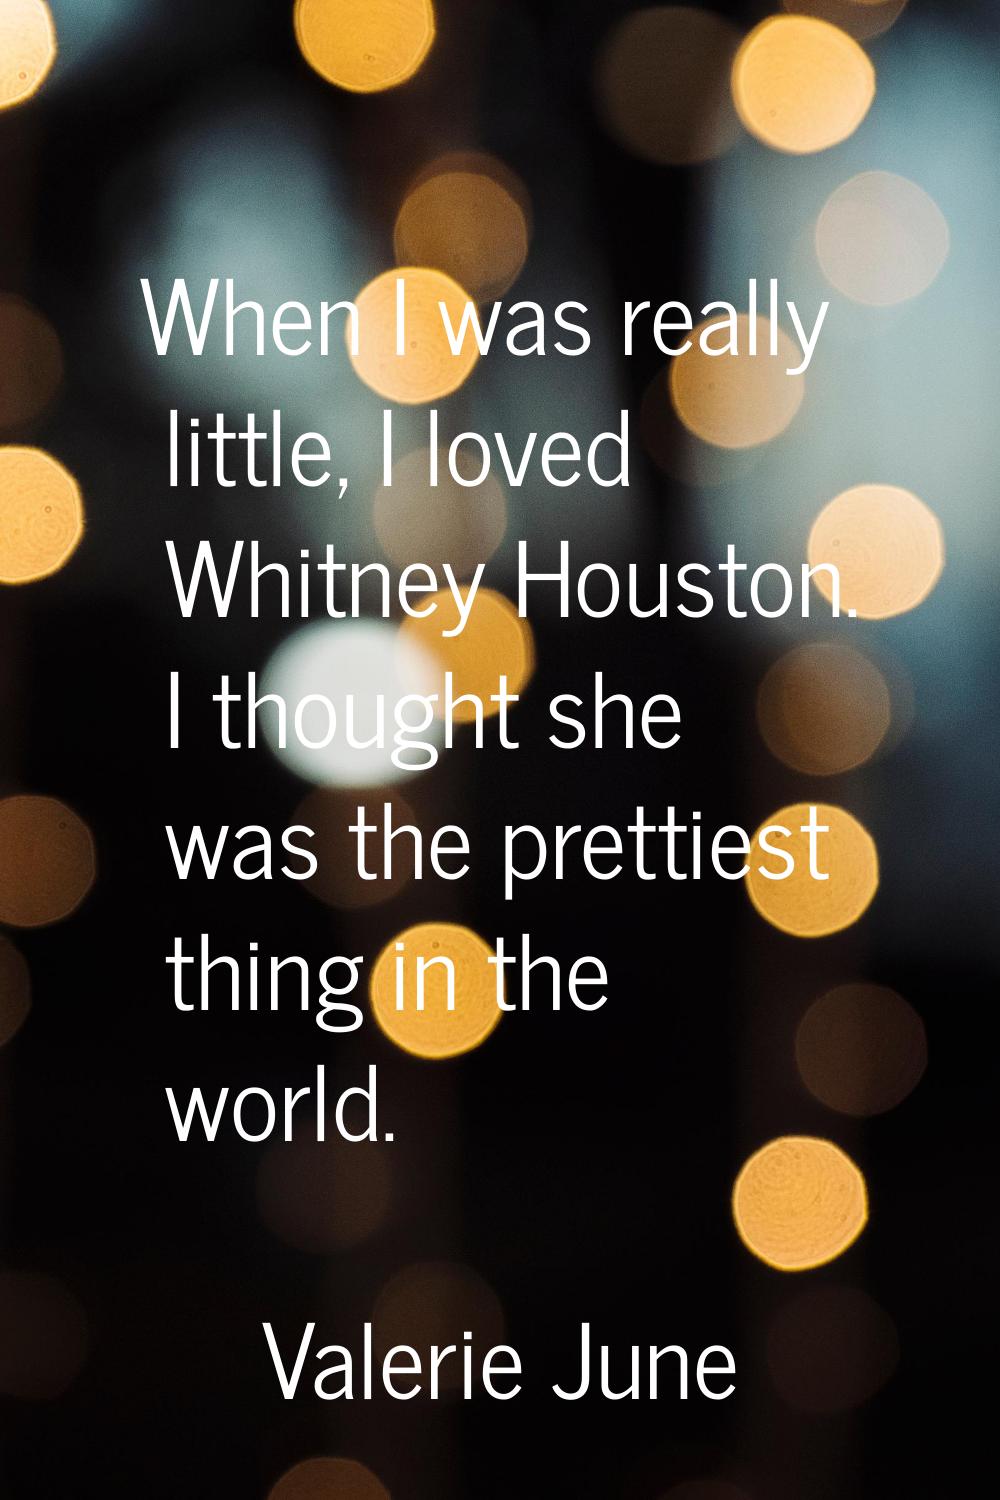 When I was really little, I loved Whitney Houston. I thought she was the prettiest thing in the wor